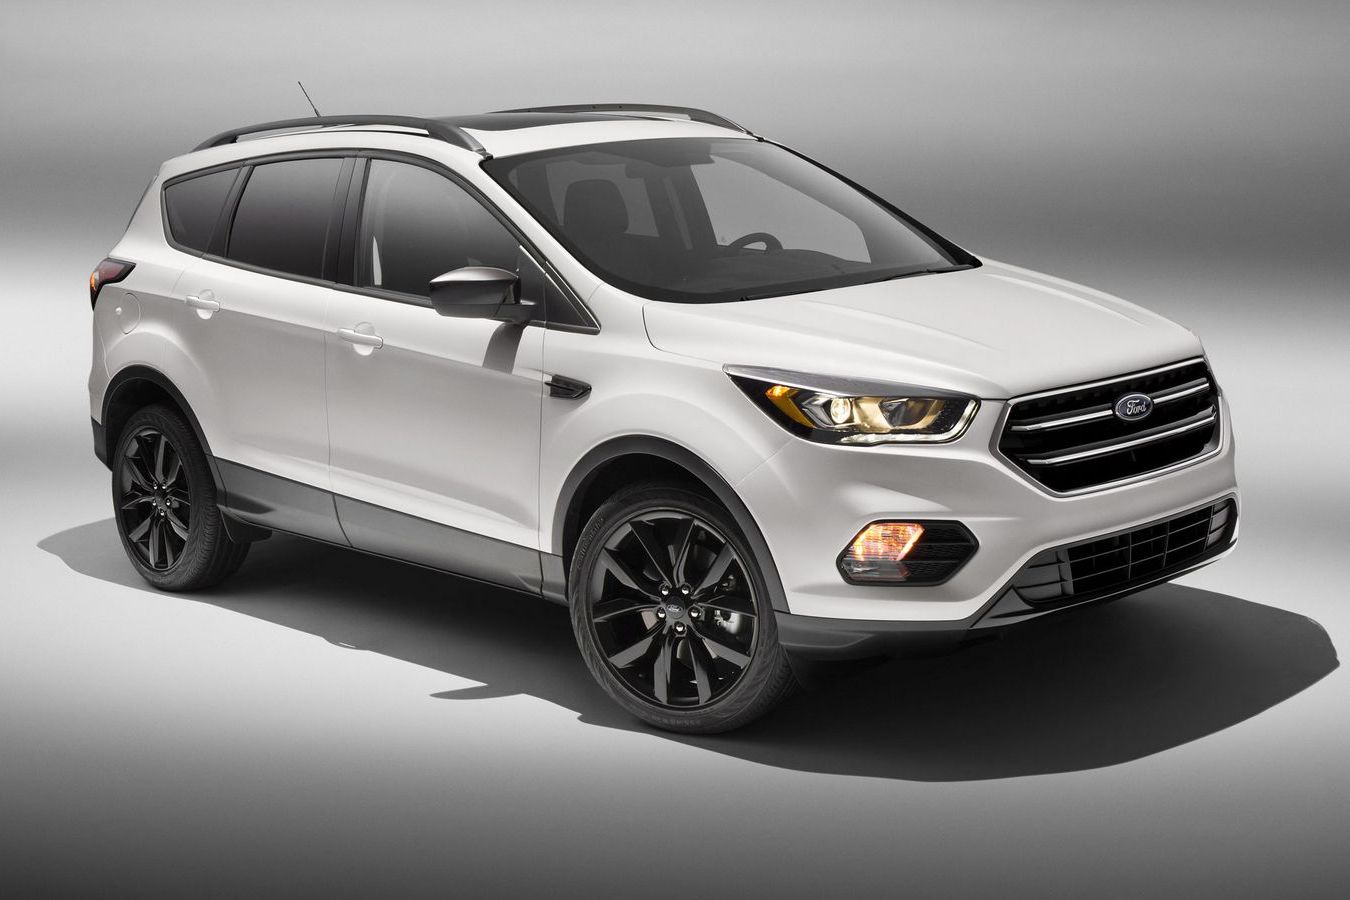 ford-escape-sport-appearance-package-001-1.jpg